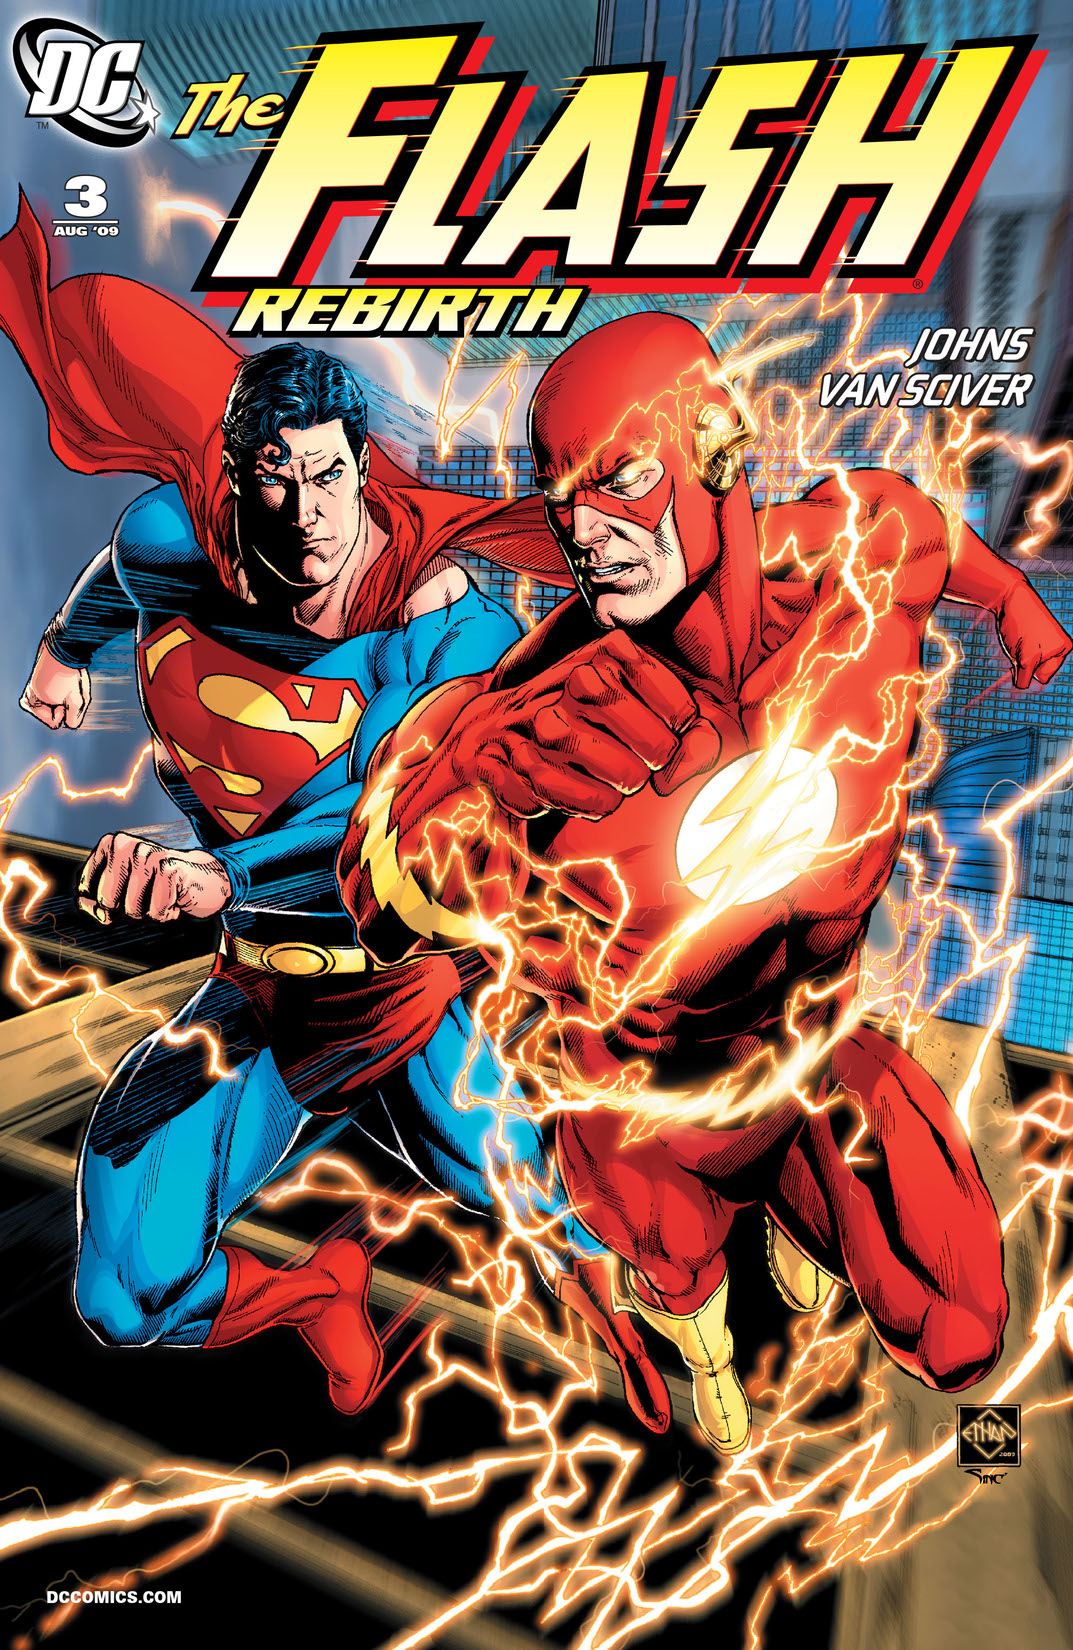 The Flash: Rebirth #3 preview images